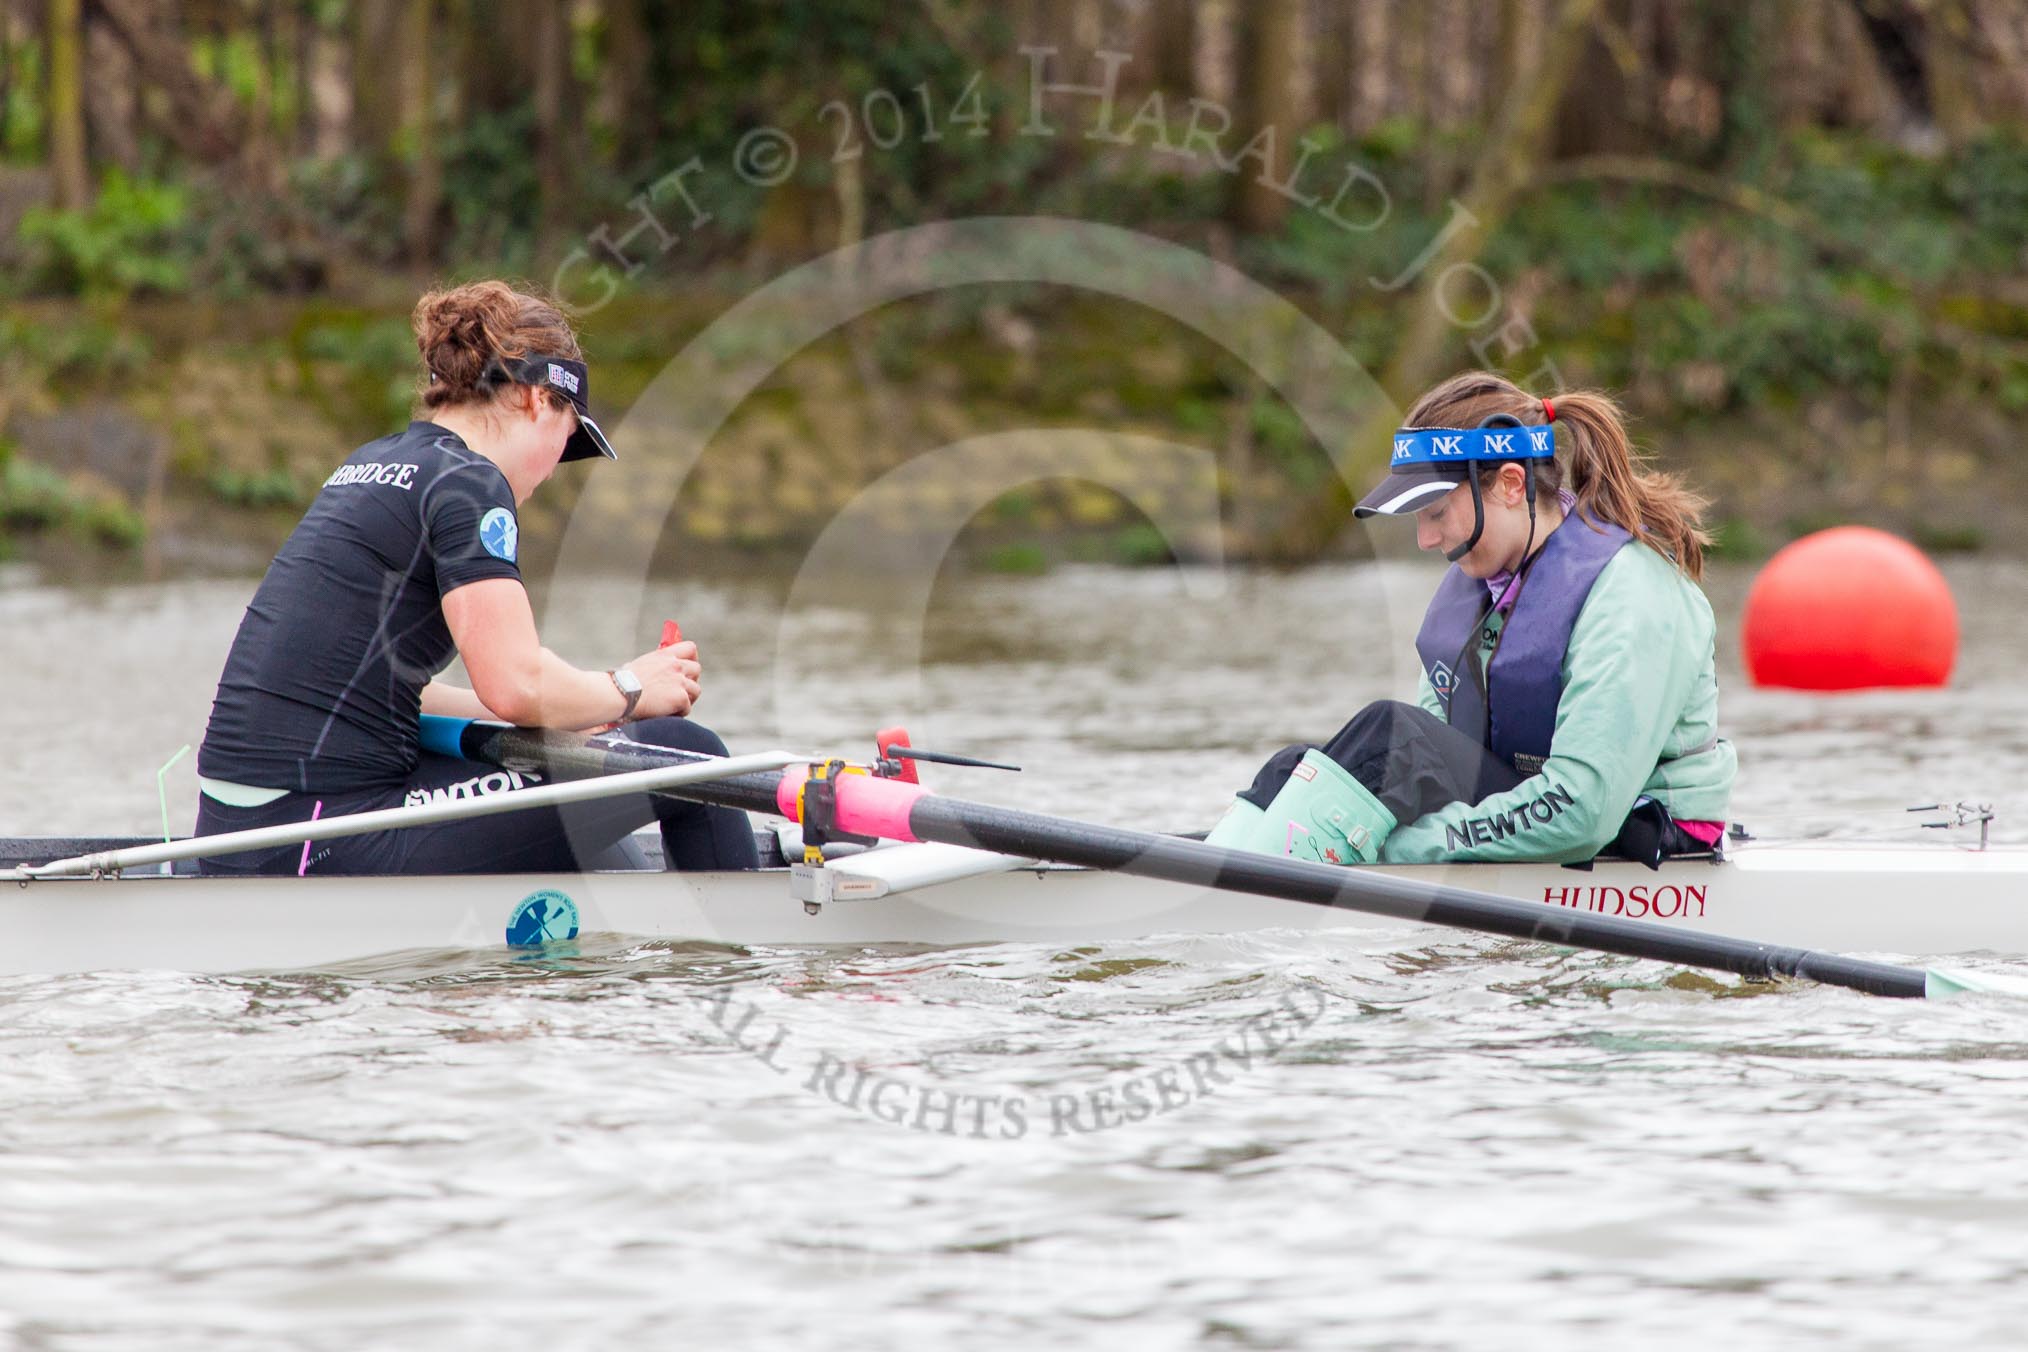 The Boat Race season 2014 - fixture CUWBC vs Thames RC.




on 02 March 2014 at 14:04, image #185